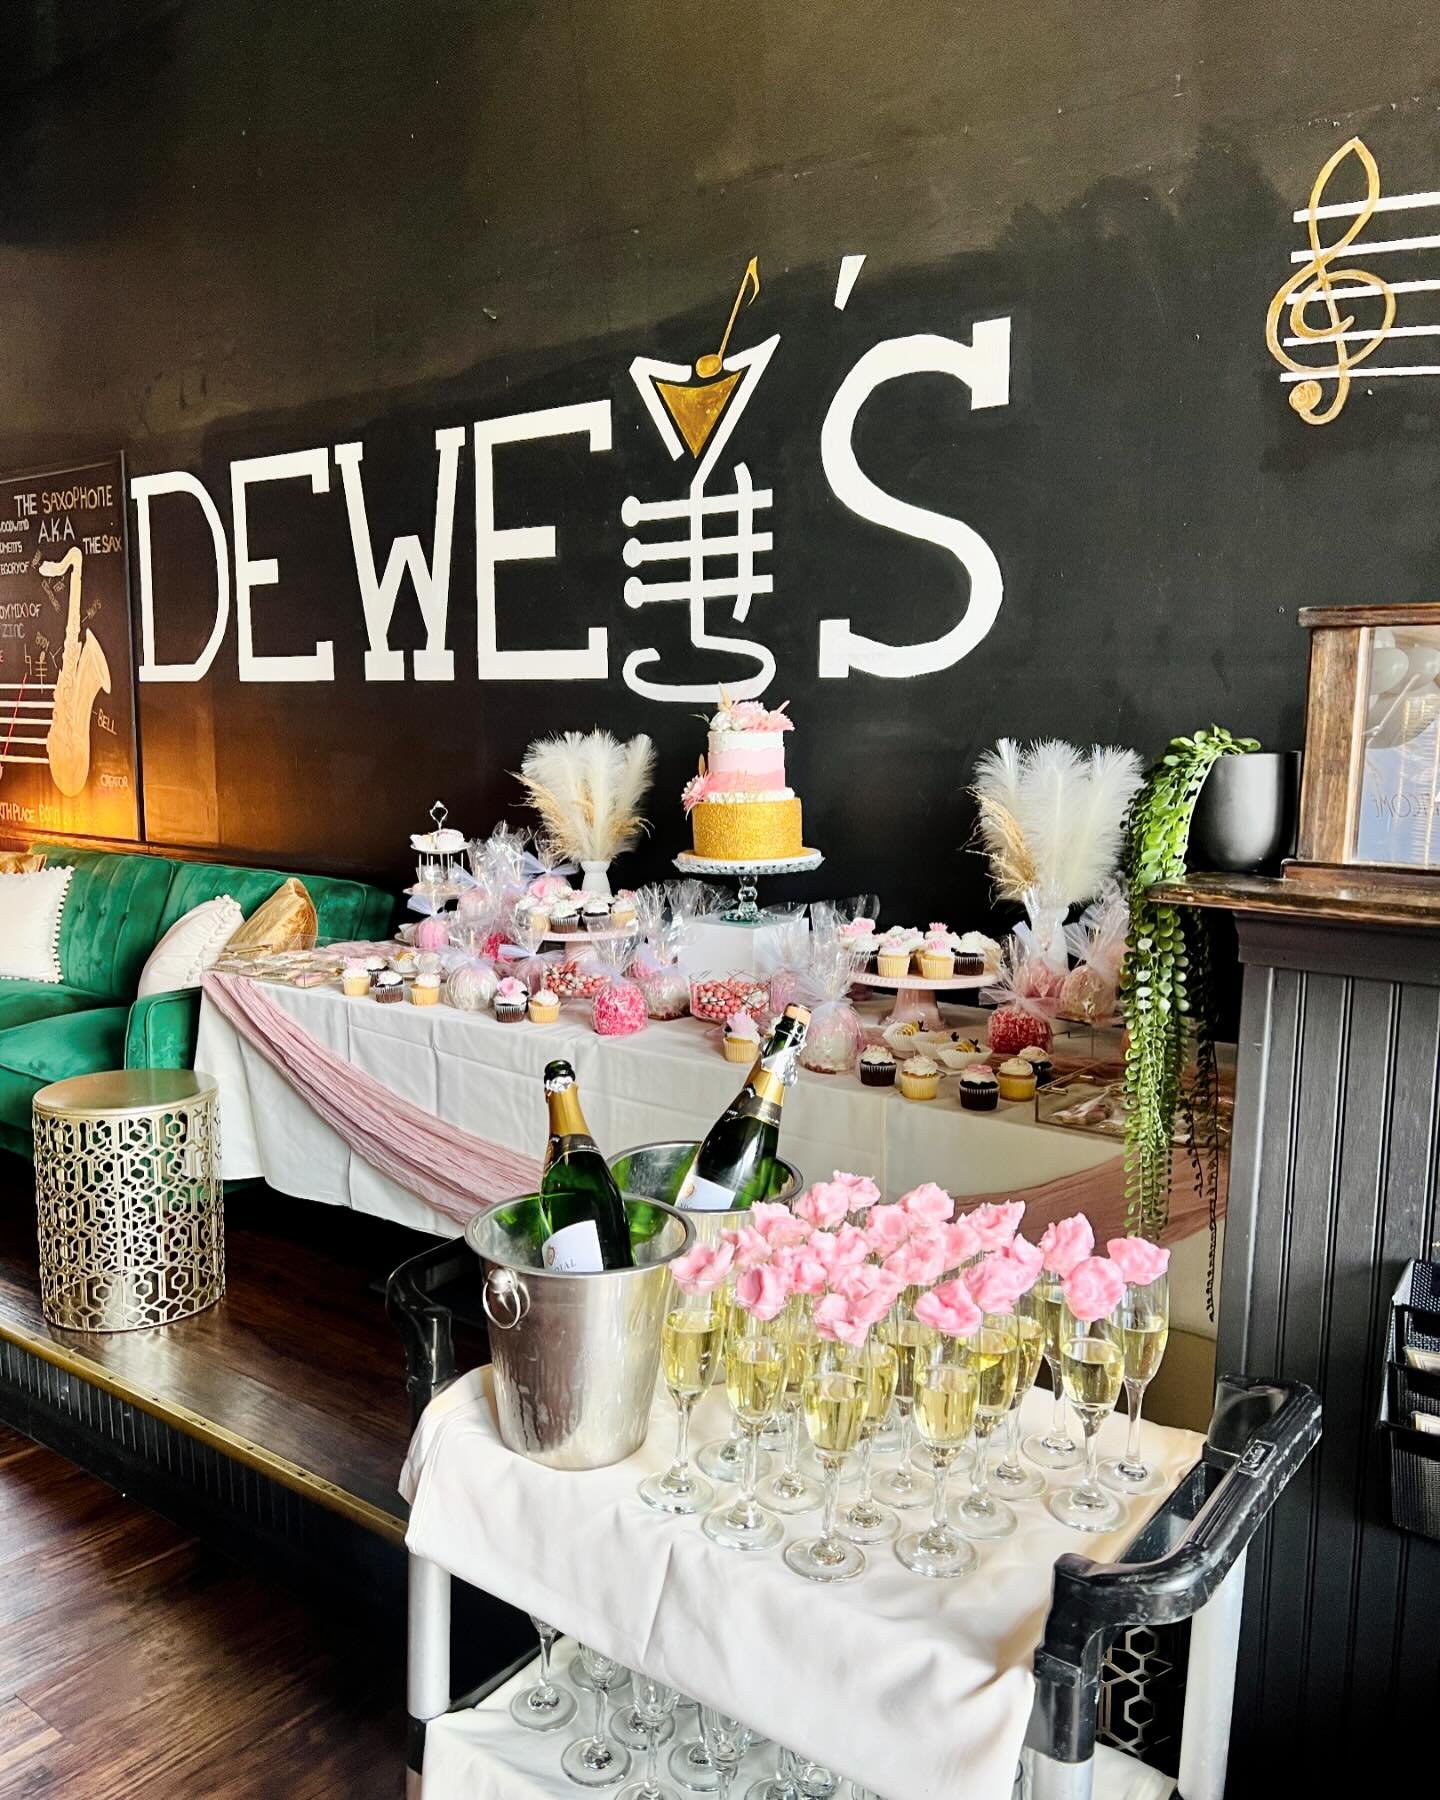 We love providing a space for our guests to create long-lasting memories with their favorite people. 🖤

Thank you to Leah for choosing Dewey&rsquo;s to celebrate your 40th birthday &ndash; It was truly our pleasure and we loved serving you all! 

Fo